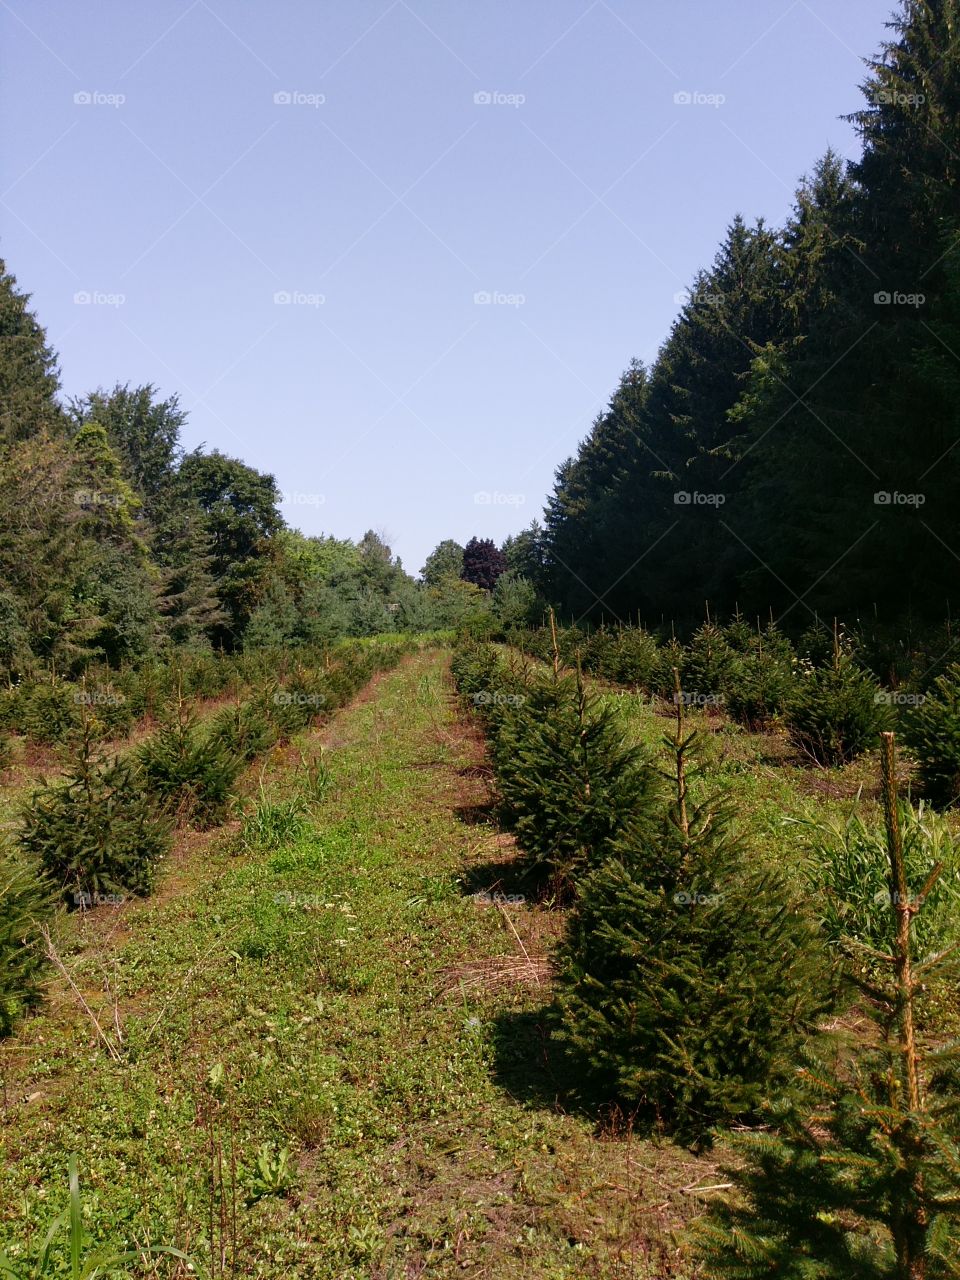 Field Of Holiday Trees